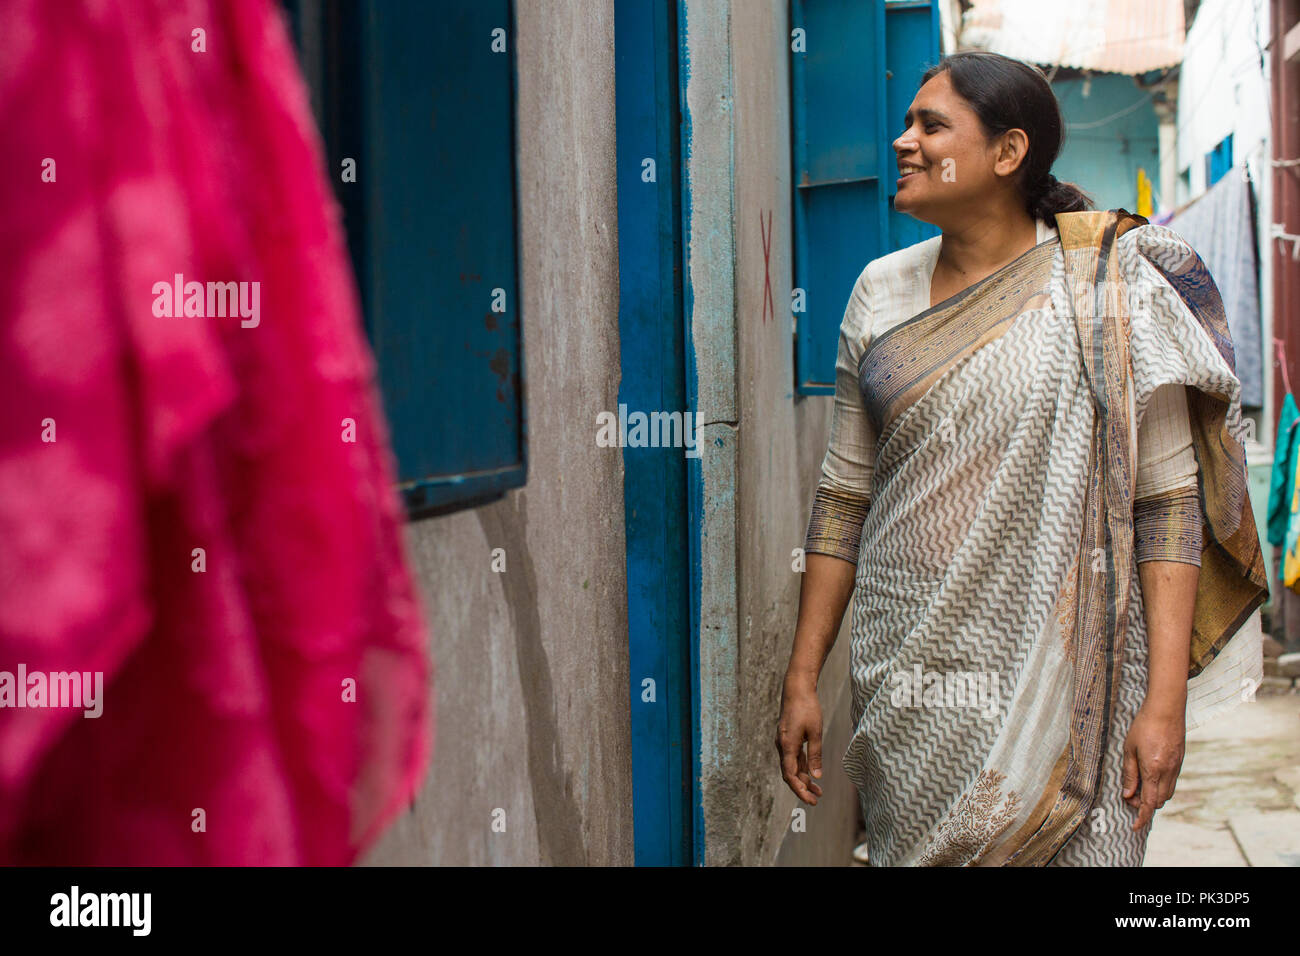 Woman visiting garment workers as part of community outreach work. Stock Photo